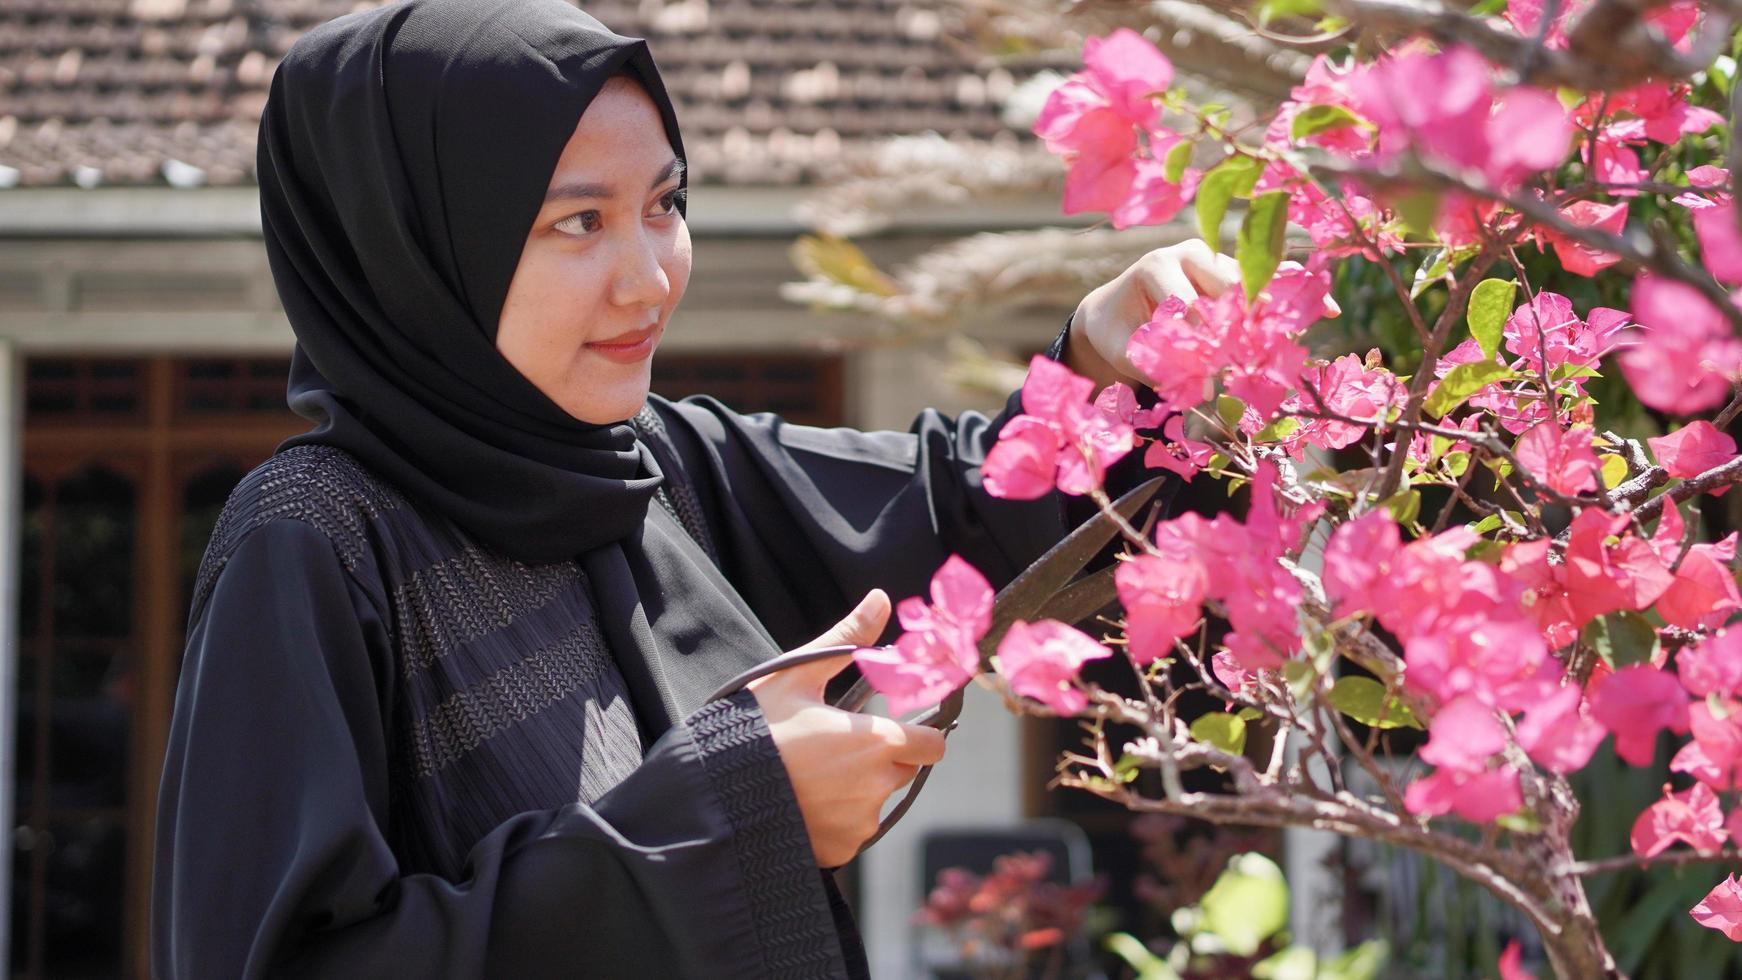 The beauty in hijab is gardening, cutting flowers so that they are neat in the garden photo